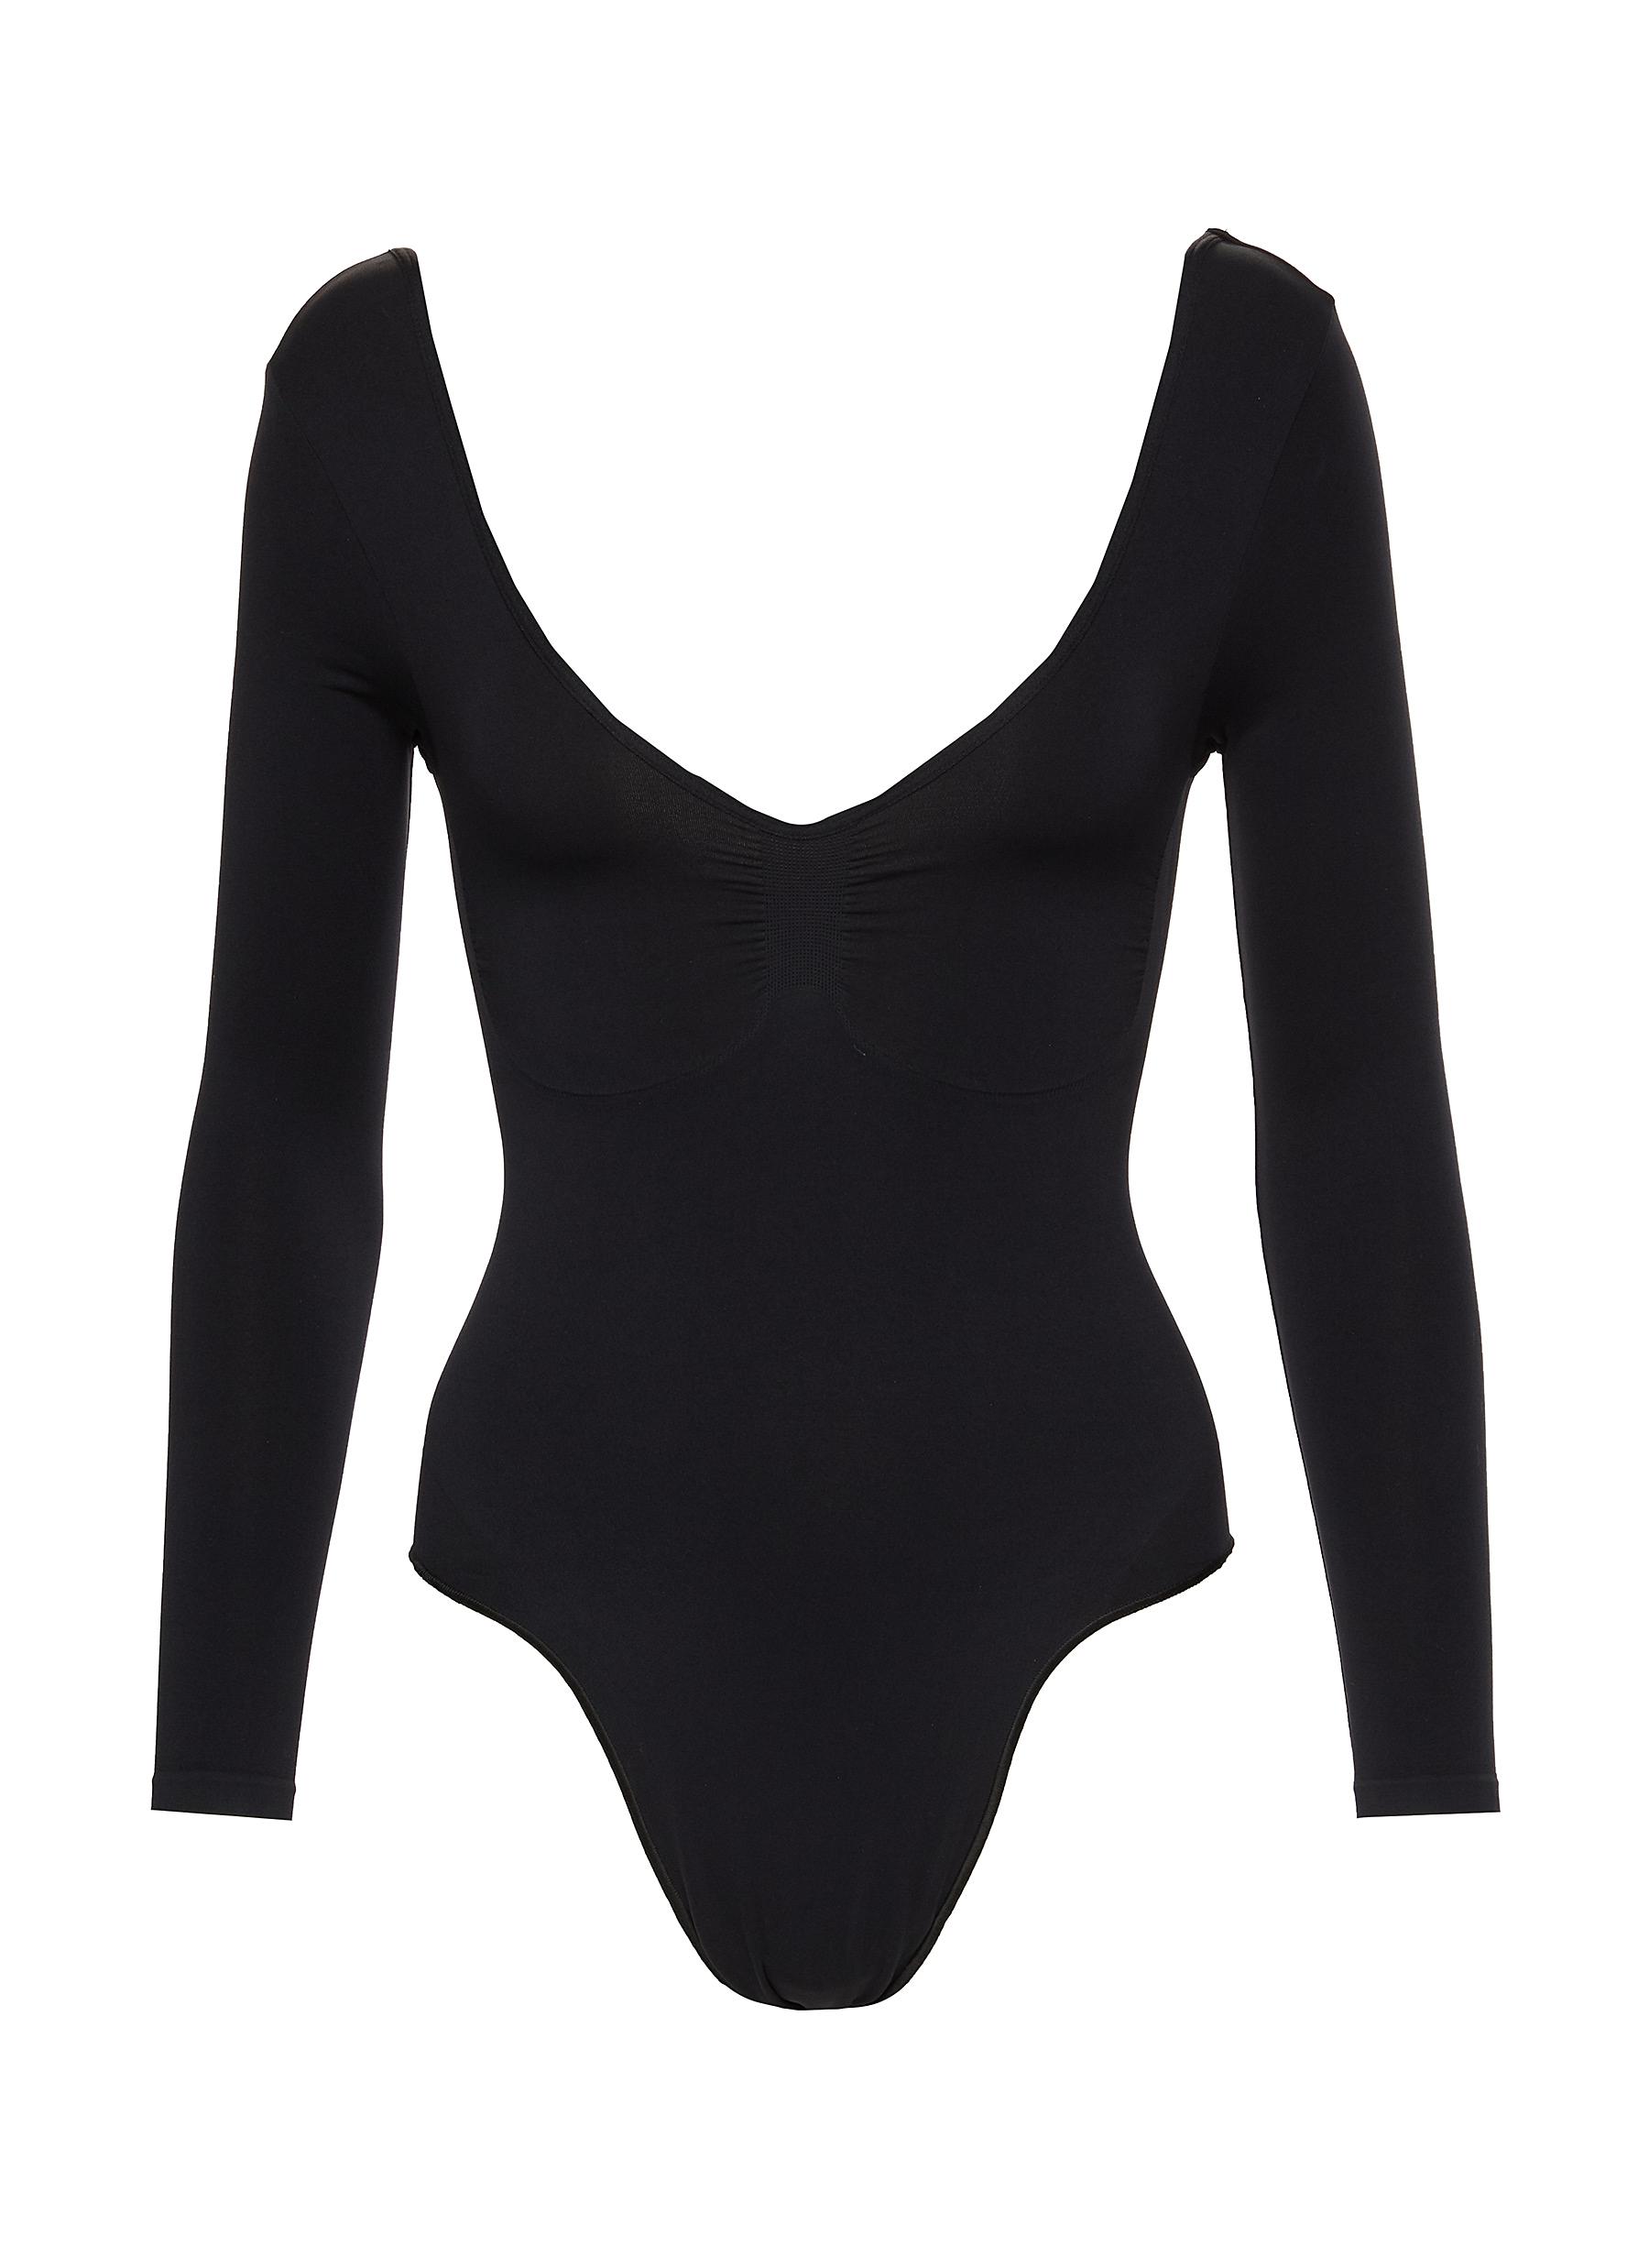 NWT SKIMS Soft Smoothing Thong Bodysuit Black Color Eclipse Size